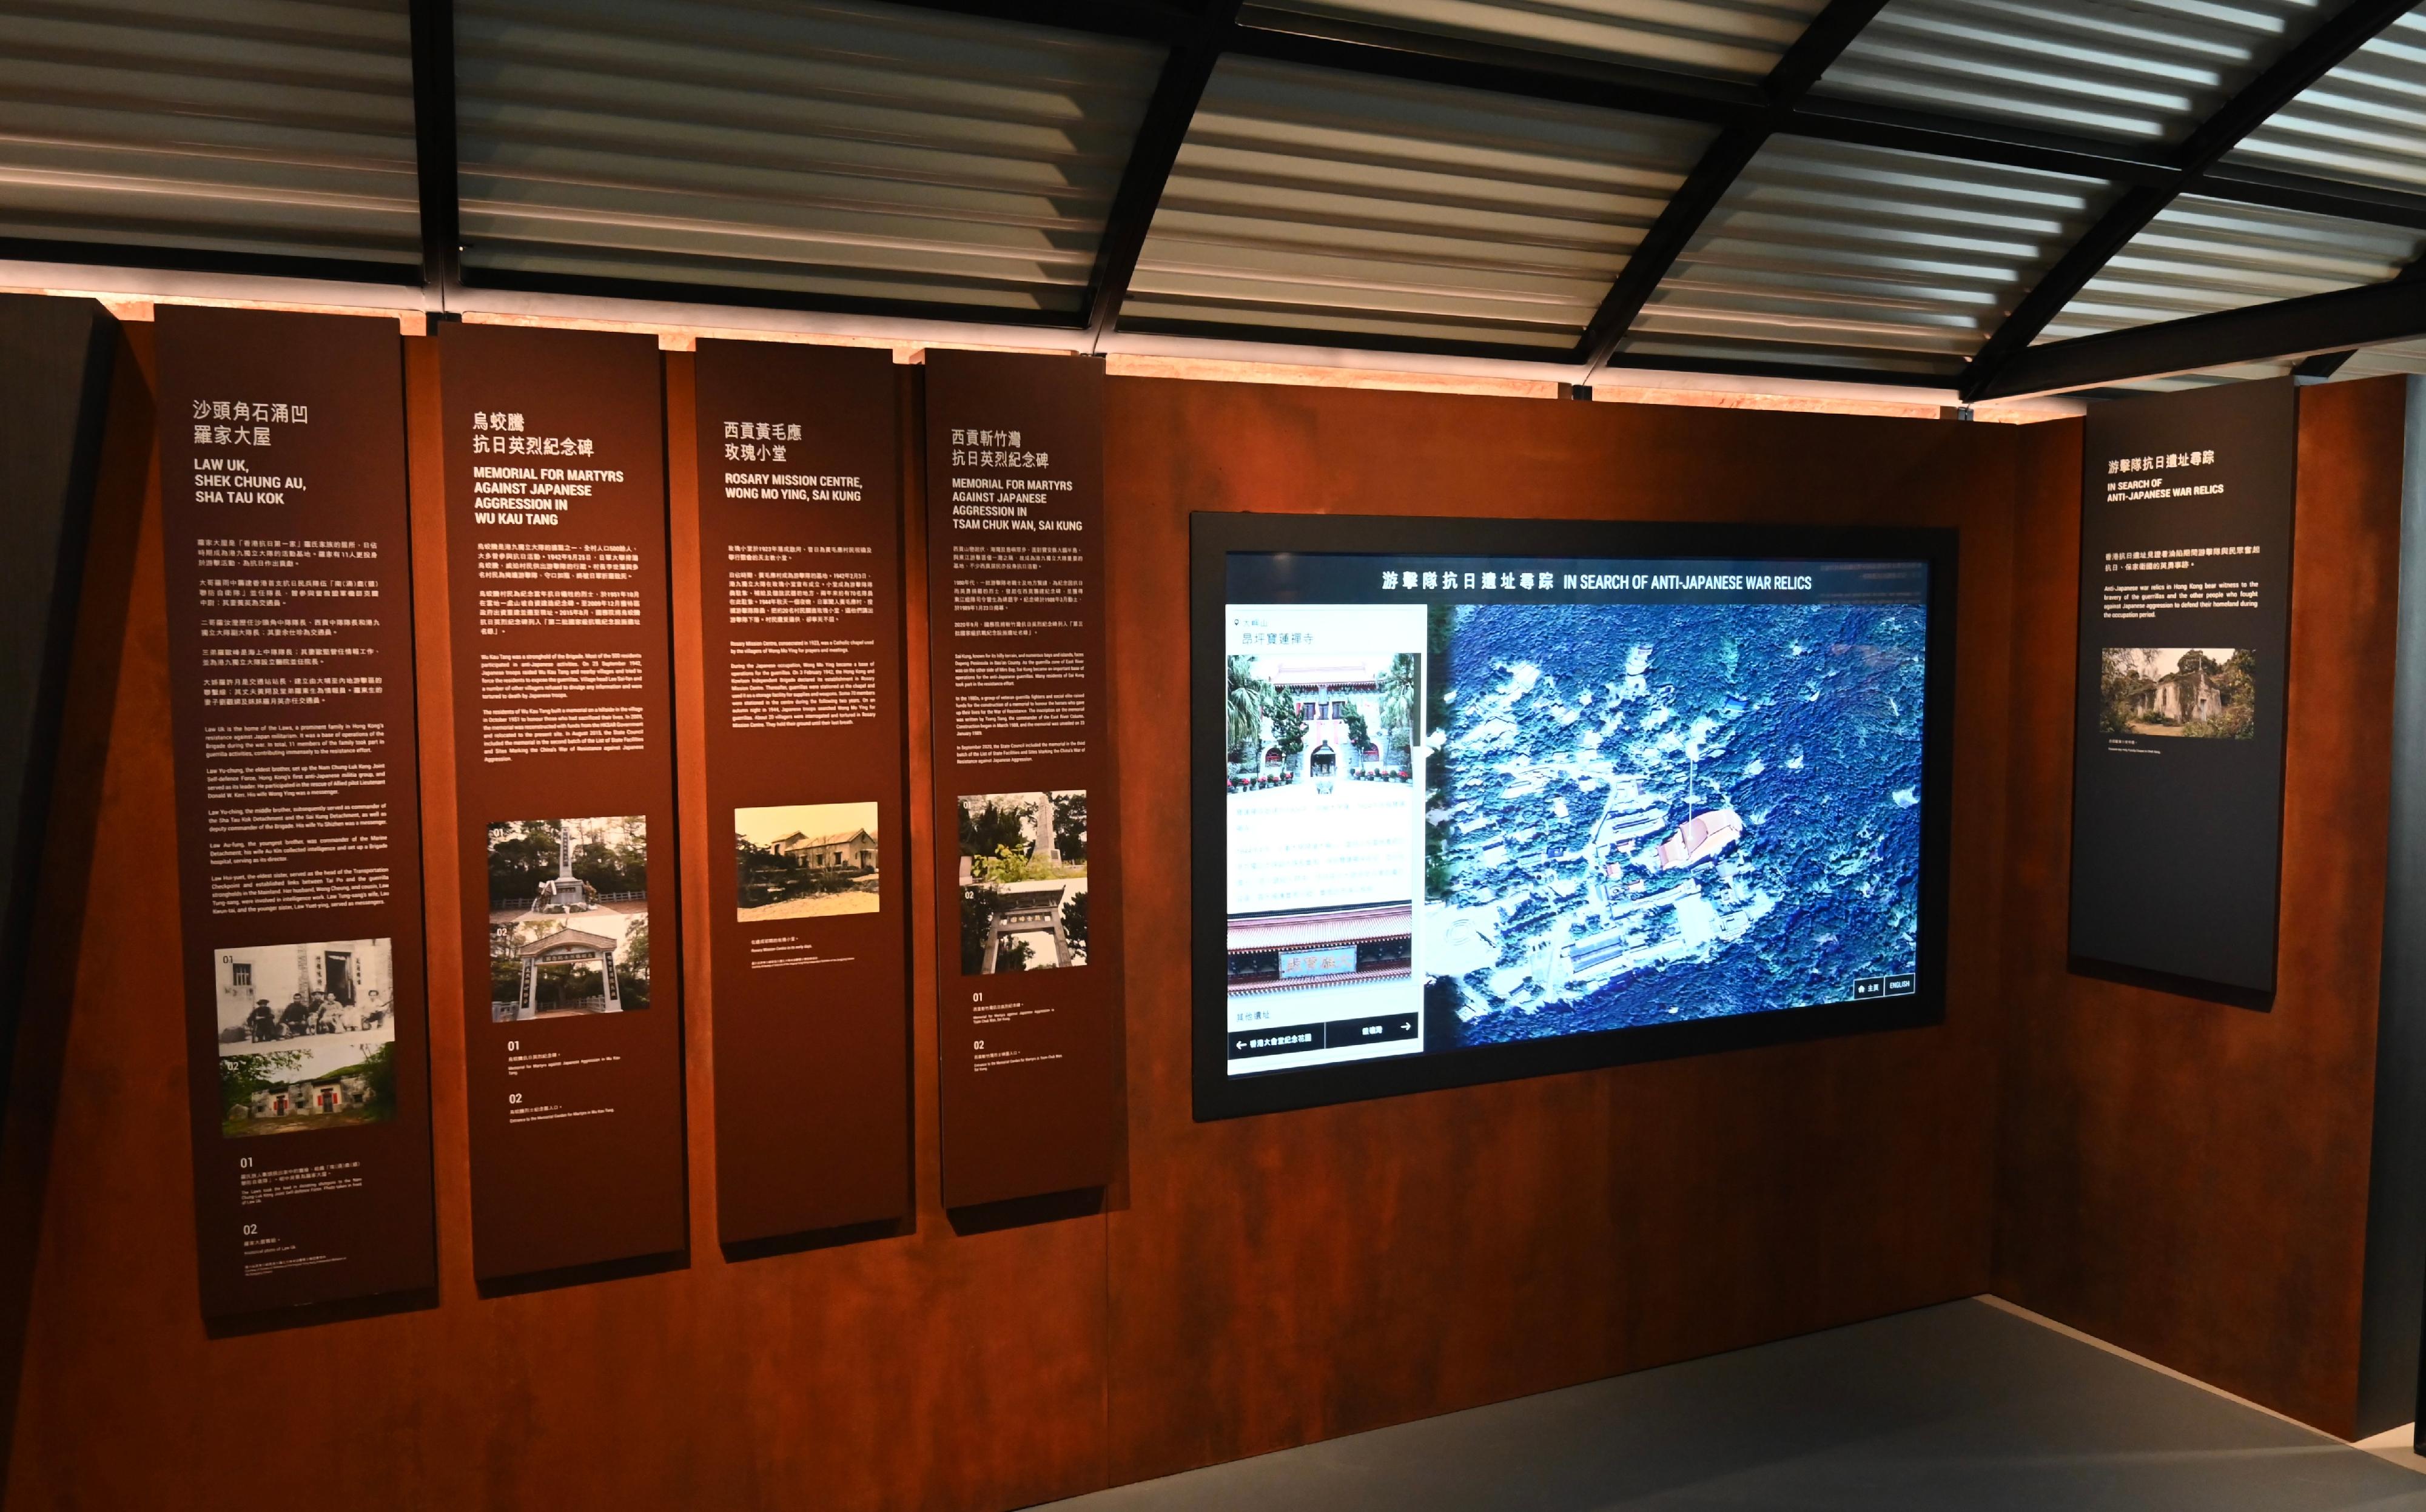 The Hong Kong Museum of Coastal Defence will reopen to the public from tomorrow (November 24) and bring forward a new permanent exhibition, "The Story of Hong Kong Coastal Defence". Picture shows the interactive display, "In Search of Anti-Japanese War Relics", in the "Narrative of the War of Resistance" gallery.